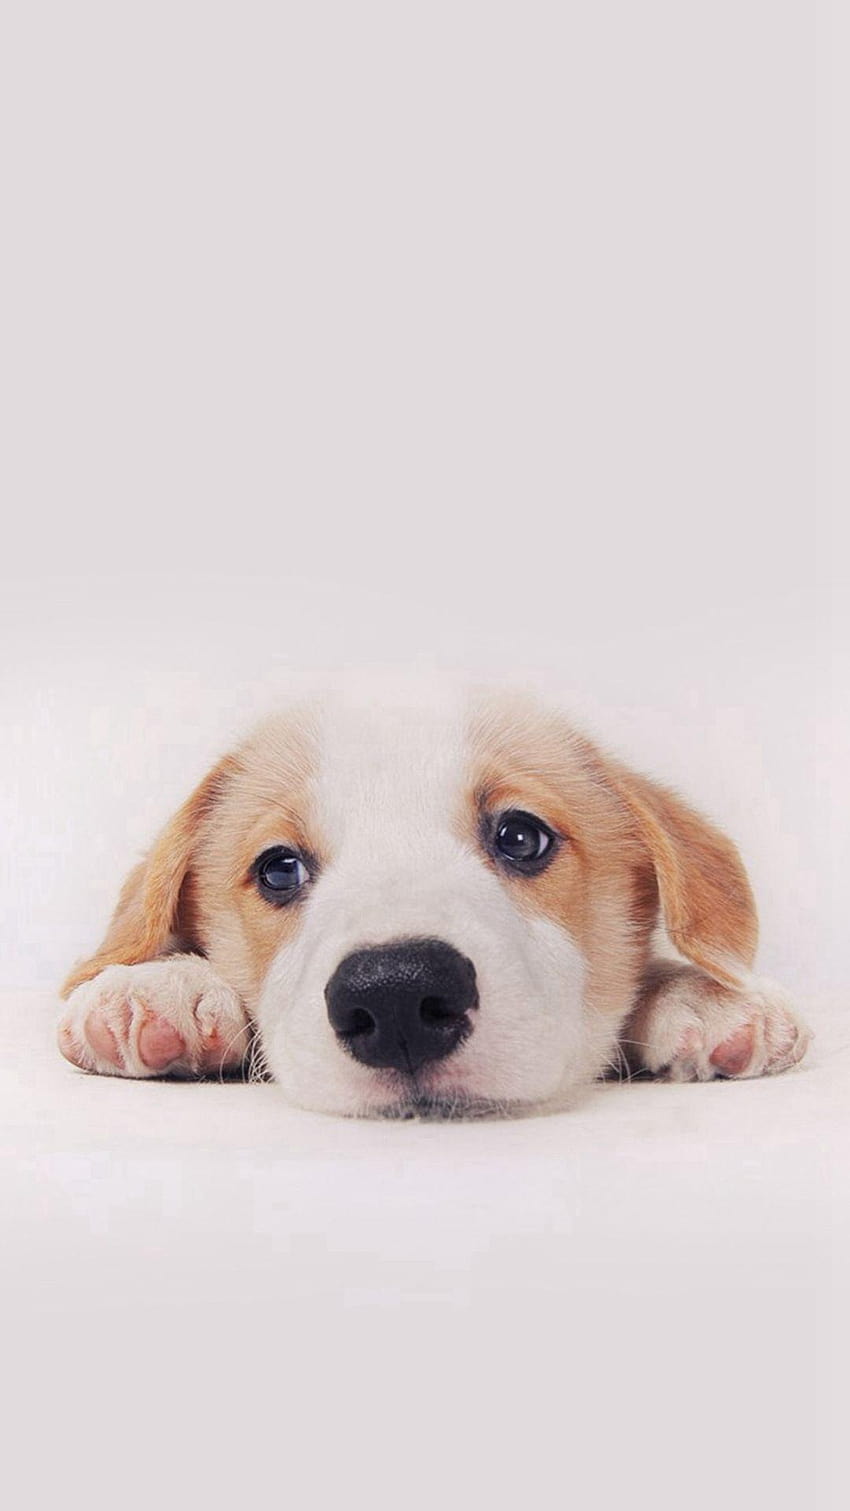 Cute Puppy Dog Pet, cute puppies for mobile HD phone wallpaper